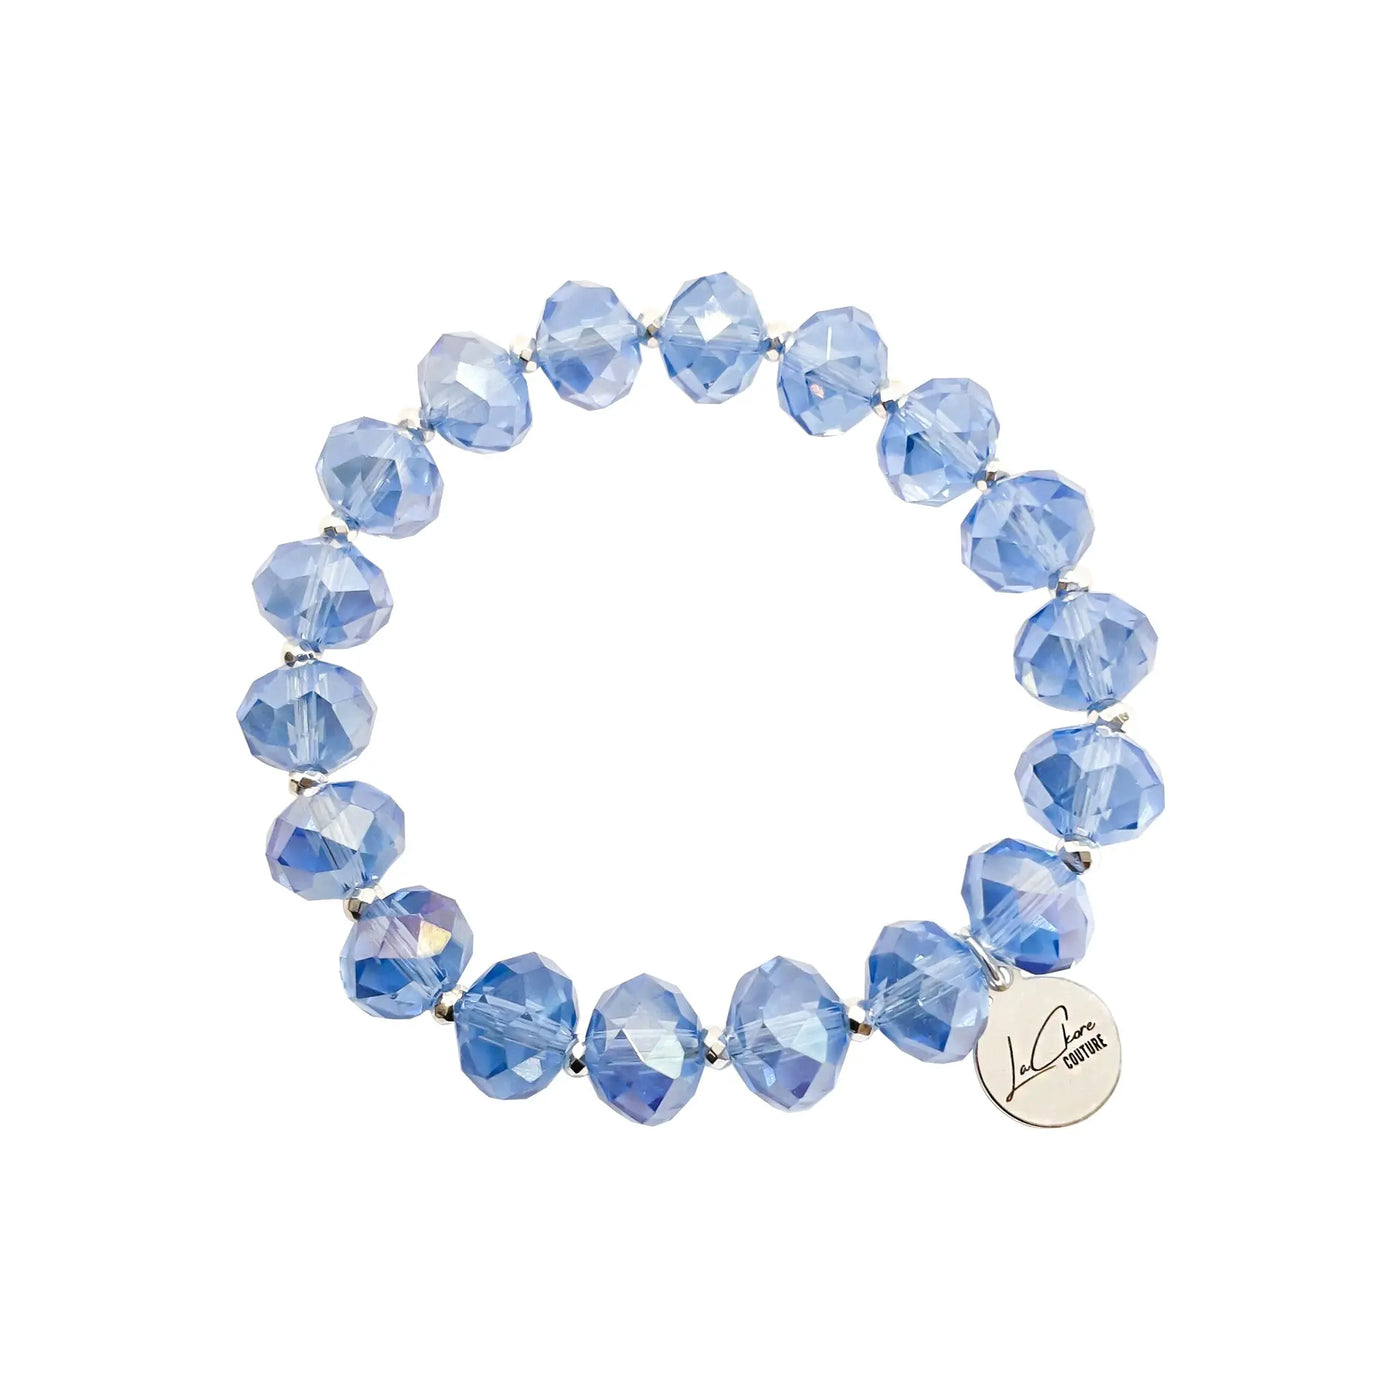 Stay Magical Bracelet LaCkore Couture